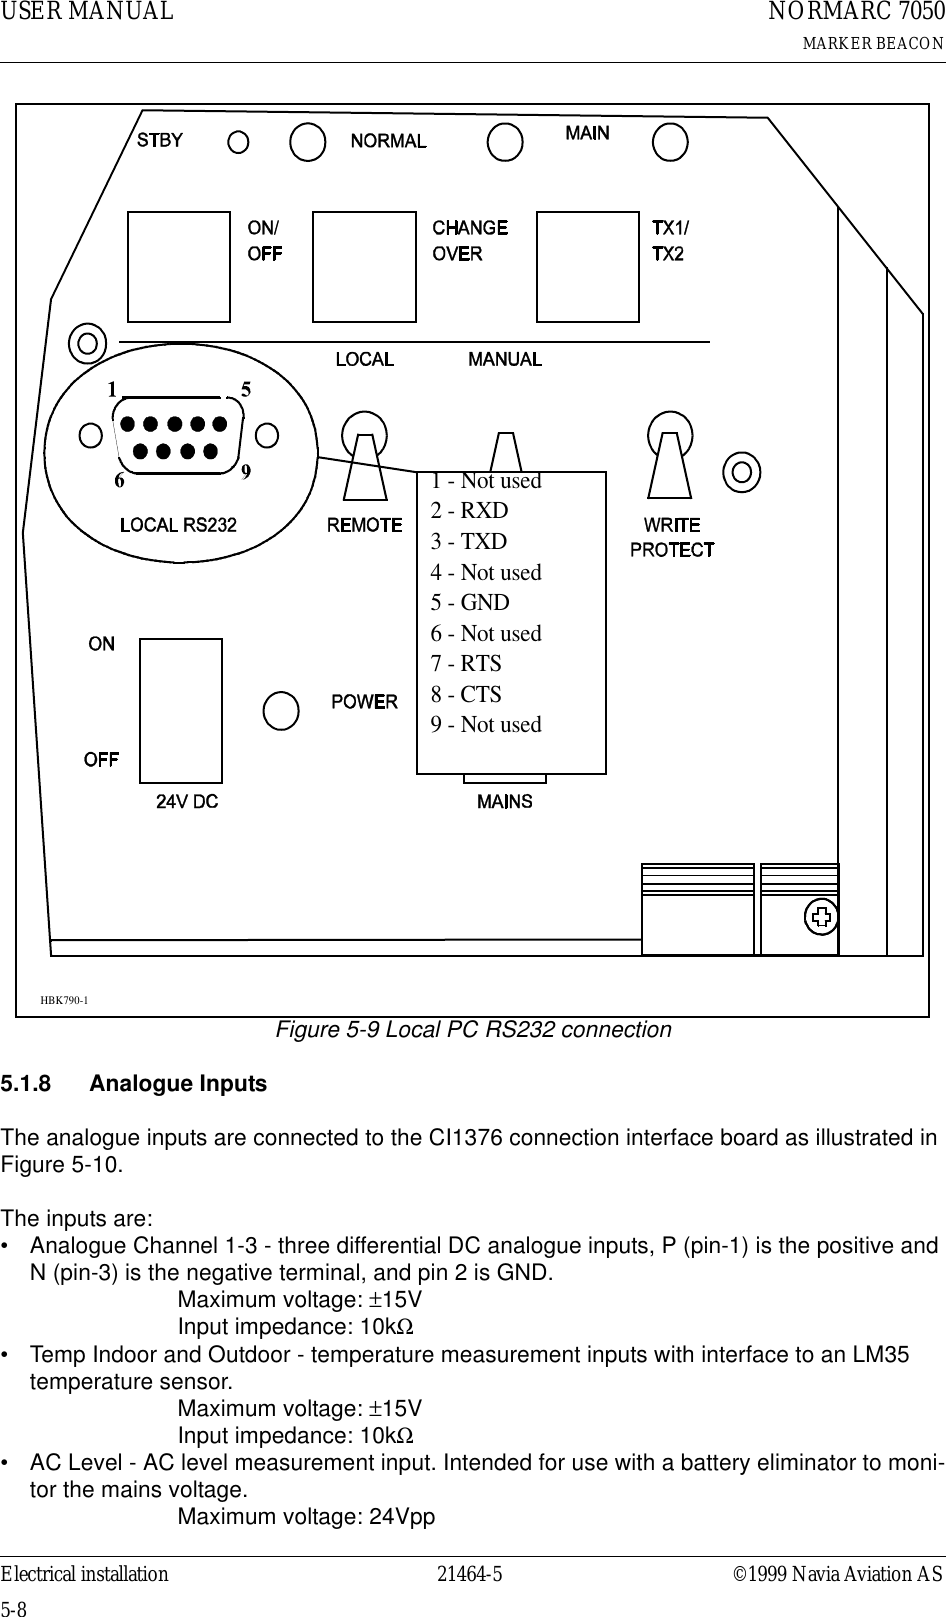 USER MANUAL5-821464-5NORMARC 7050MARKER BEACONElectrical installation ©1999 Navia Aviation ASFigure 5-9 Local PC RS232 connection5.1.8 Analogue InputsThe analogue inputs are connected to the CI1376 connection interface board as illustrated in Figure 5-10.The inputs are:• Analogue Channel 1-3 - three differential DC analogue inputs, P (pin-1) is the positive and N (pin-3) is the negative terminal, and pin 2 is GND.Maximum voltage: ±15VInput impedance: 10kΩ• Temp Indoor and Outdoor - temperature measurement inputs with interface to an LM35 temperature sensor.Maximum voltage: ±15VInput impedance: 10kΩ• AC Level - AC level measurement input. Intended for use with a battery eliminator to moni-tor the mains voltage.Maximum voltage: 24Vpp1 - Not used2 - RXD3 - TXD4 - Not used5 - GND6 - Not used7 - RTS8 - CTS9 - Not usedHBK790-1